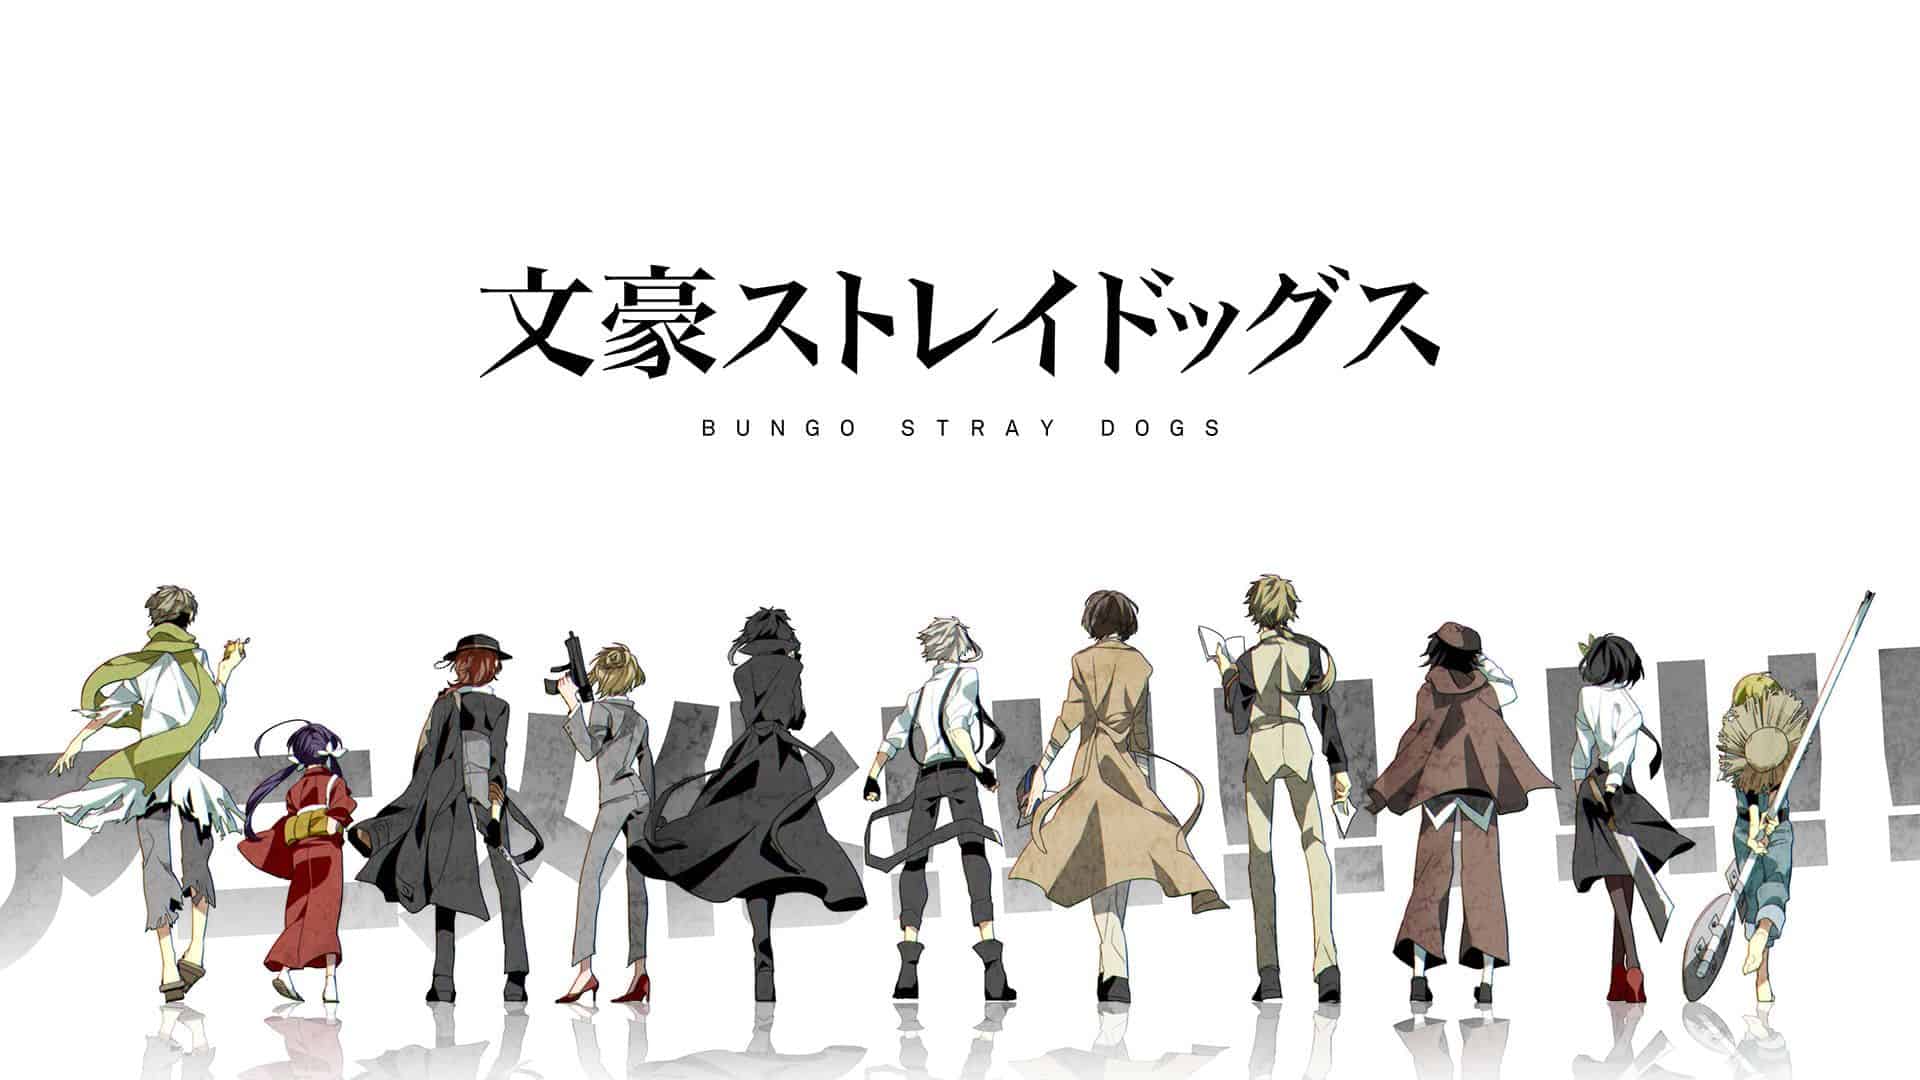 Bungo Stray Dogs Streaming Guide